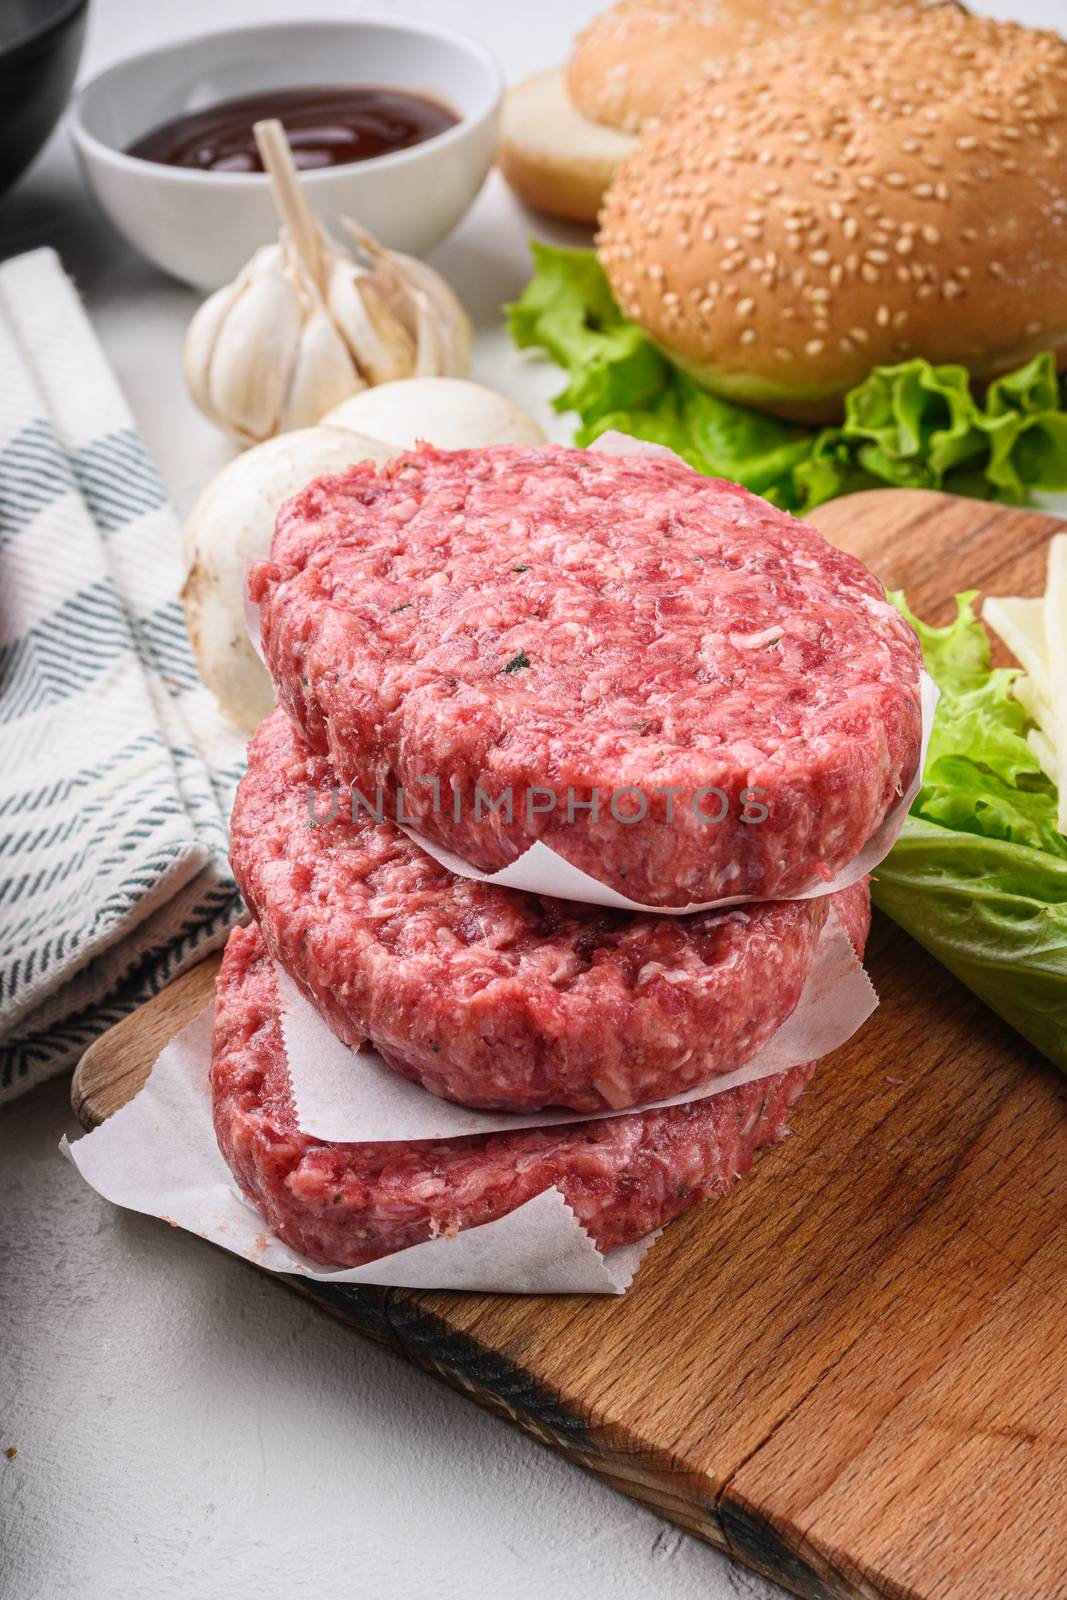 Raw ground beef meat cutlets for burger on white textured background.